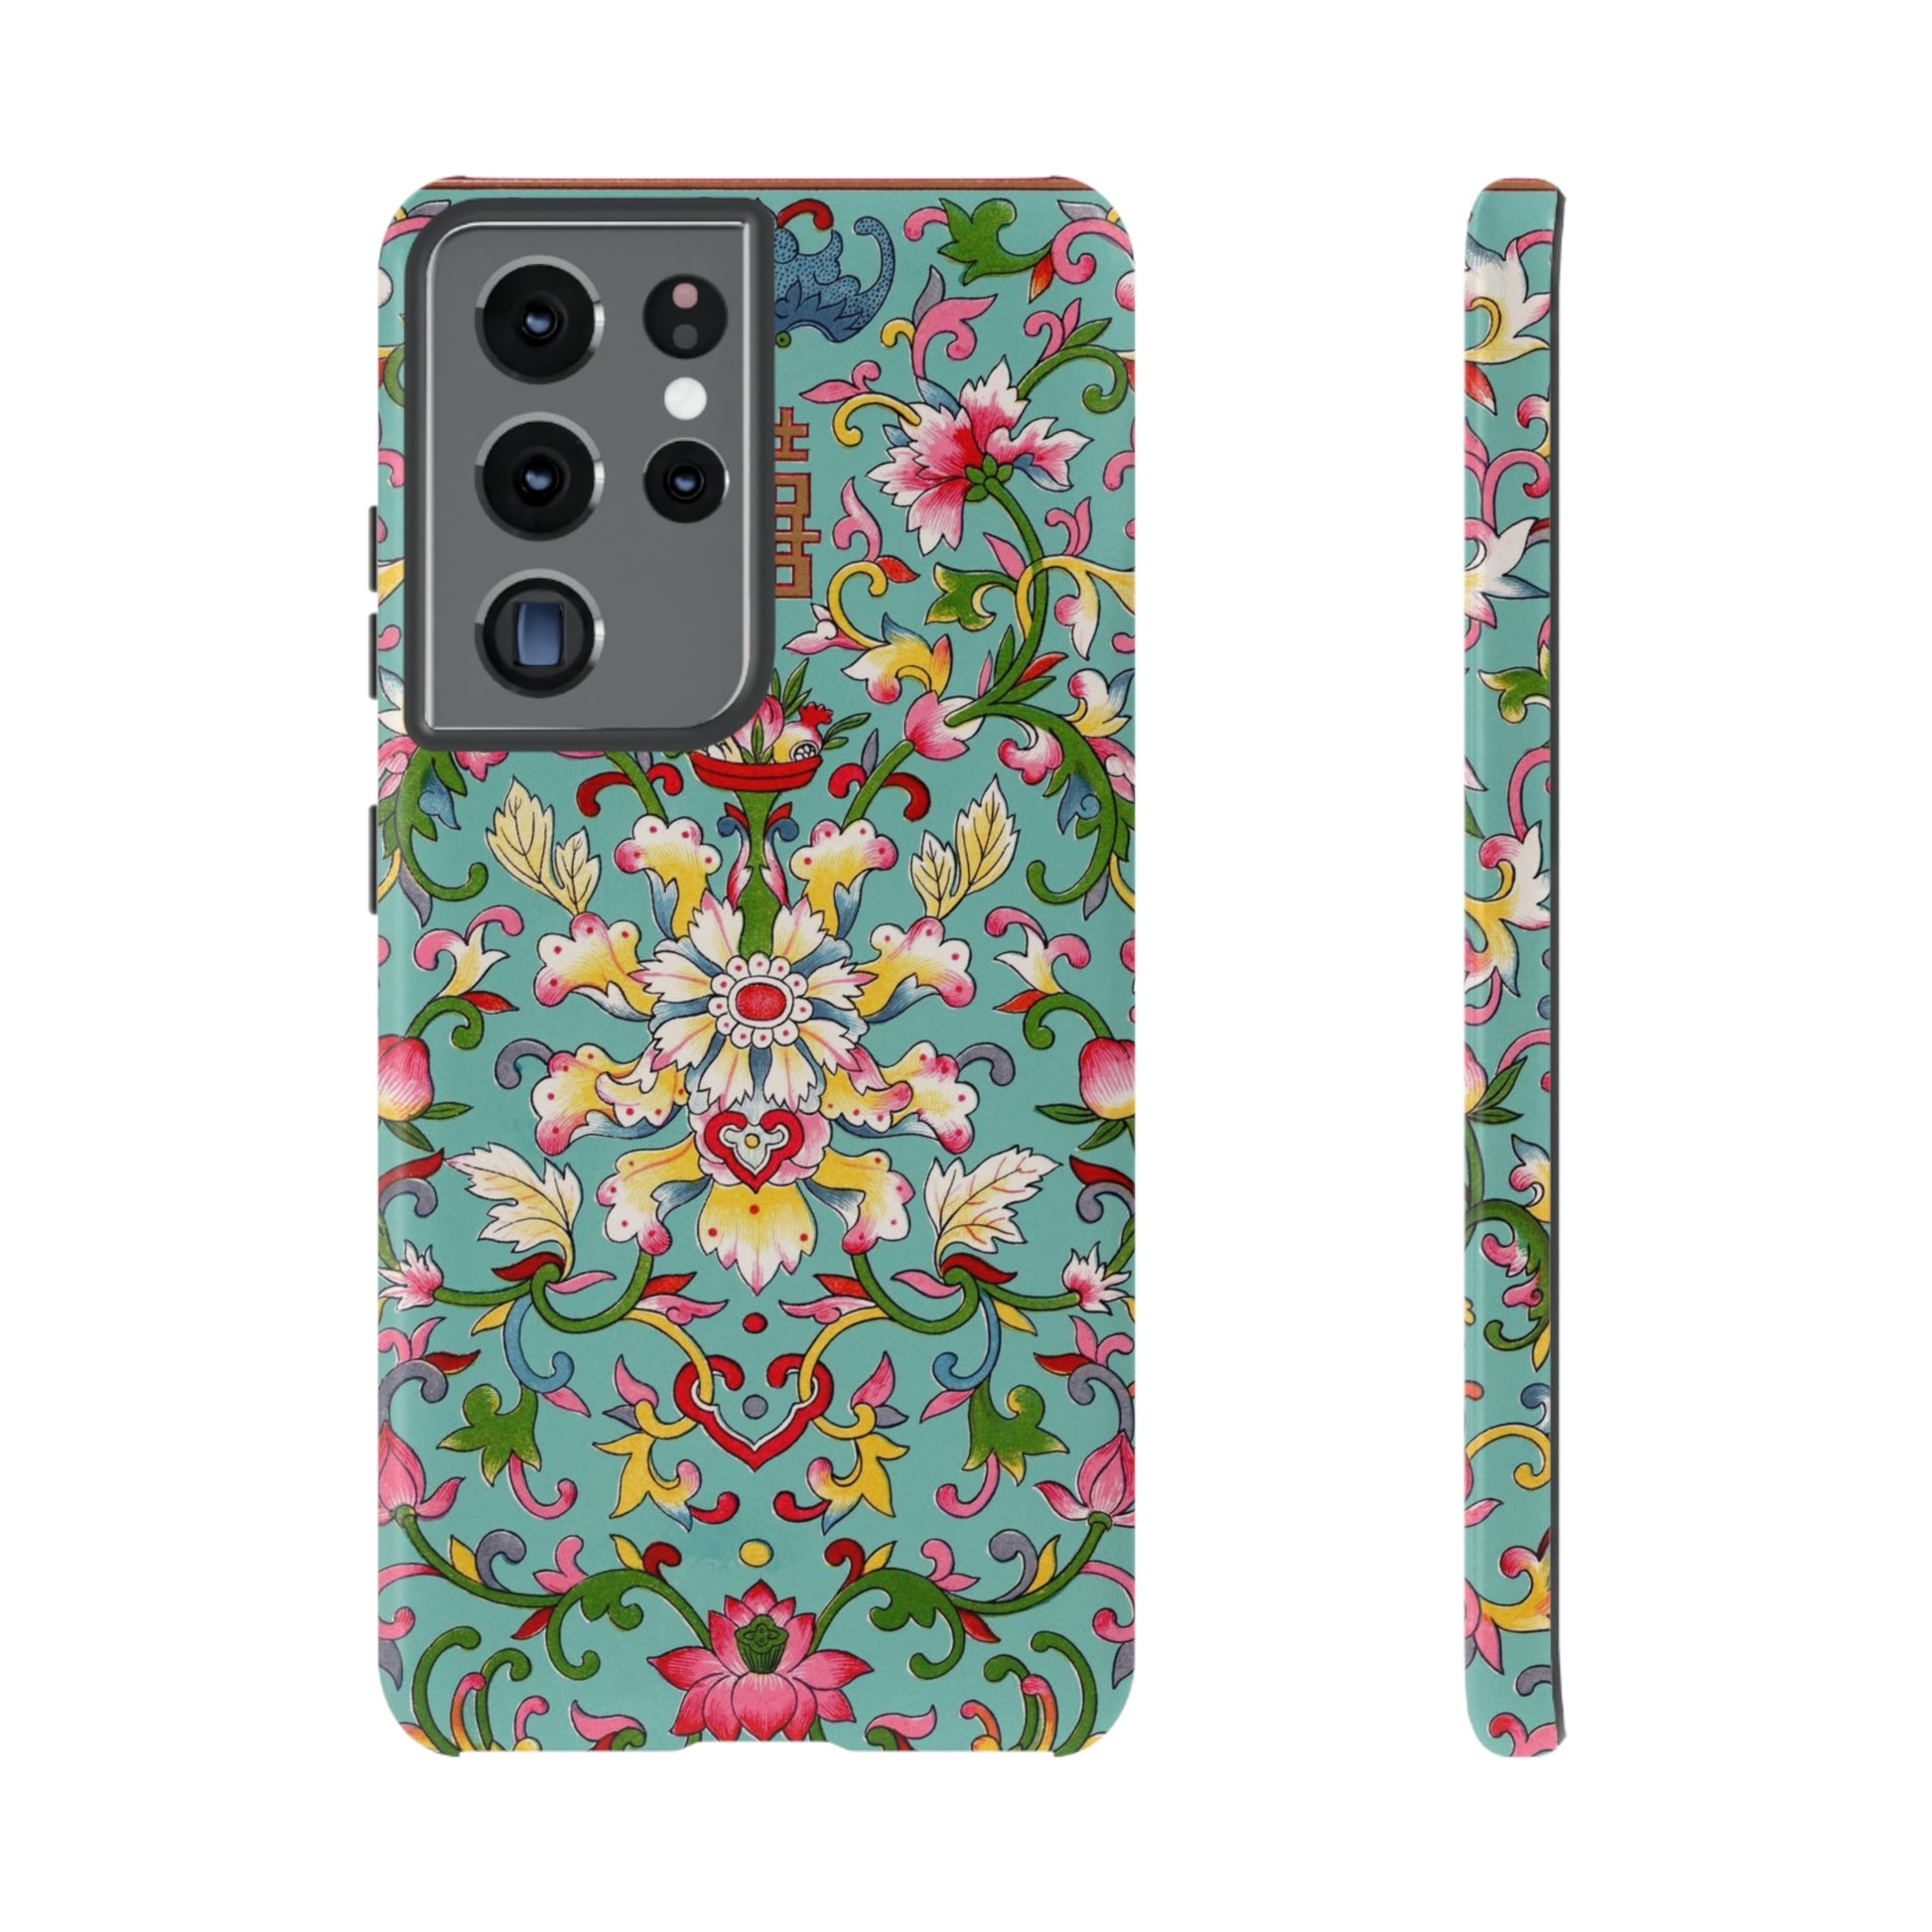 Floral Family Phone Case - BRYKNOLO LLC Phone Case Samsung Galaxy S21 Ultra / Glossy